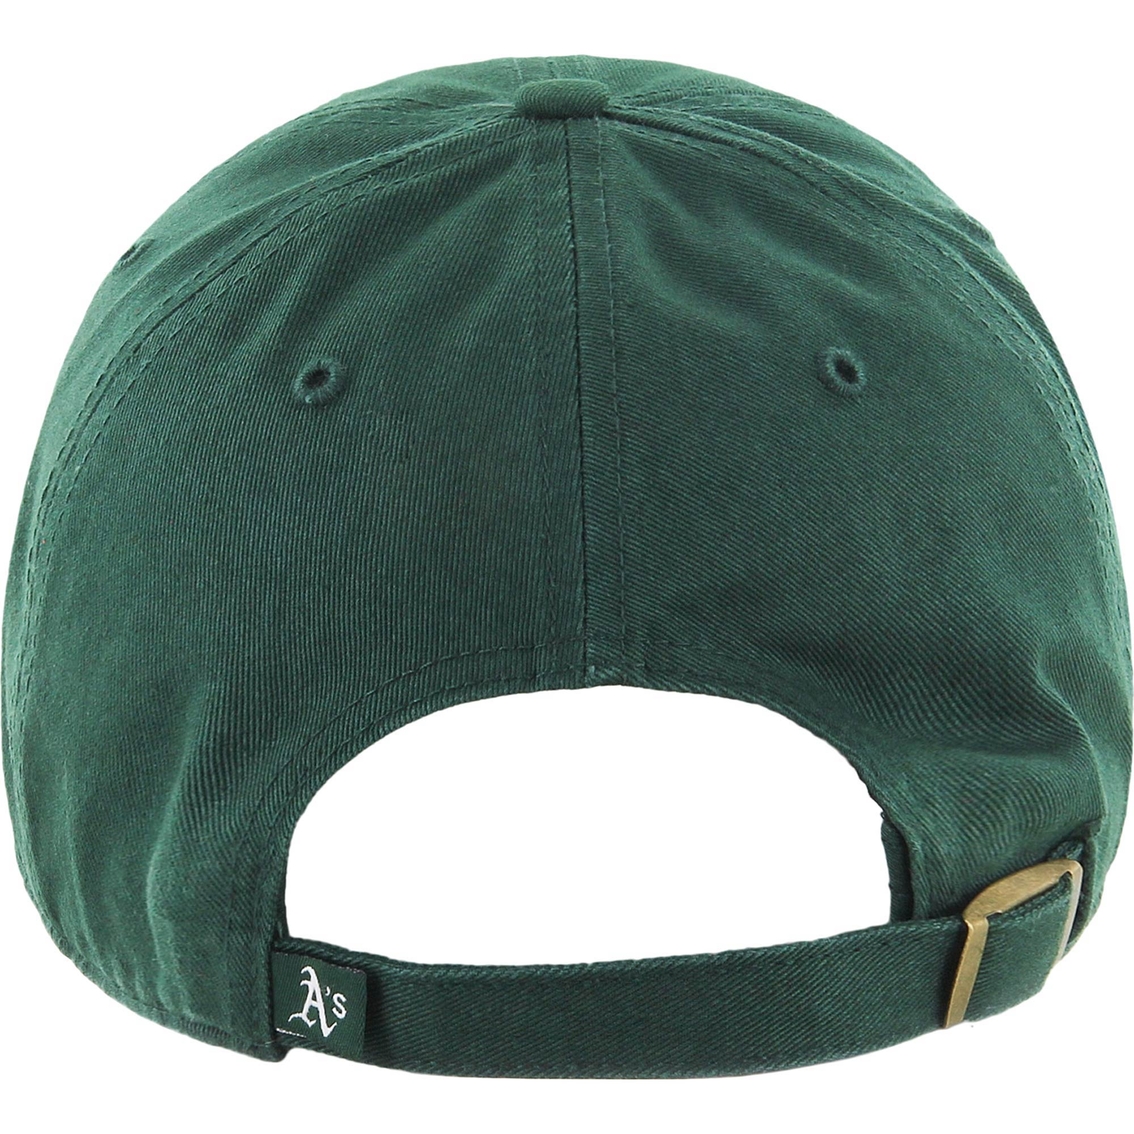 47 Brand MLB Oakland A's Clean Up Baseball Cap - Image 2 of 2